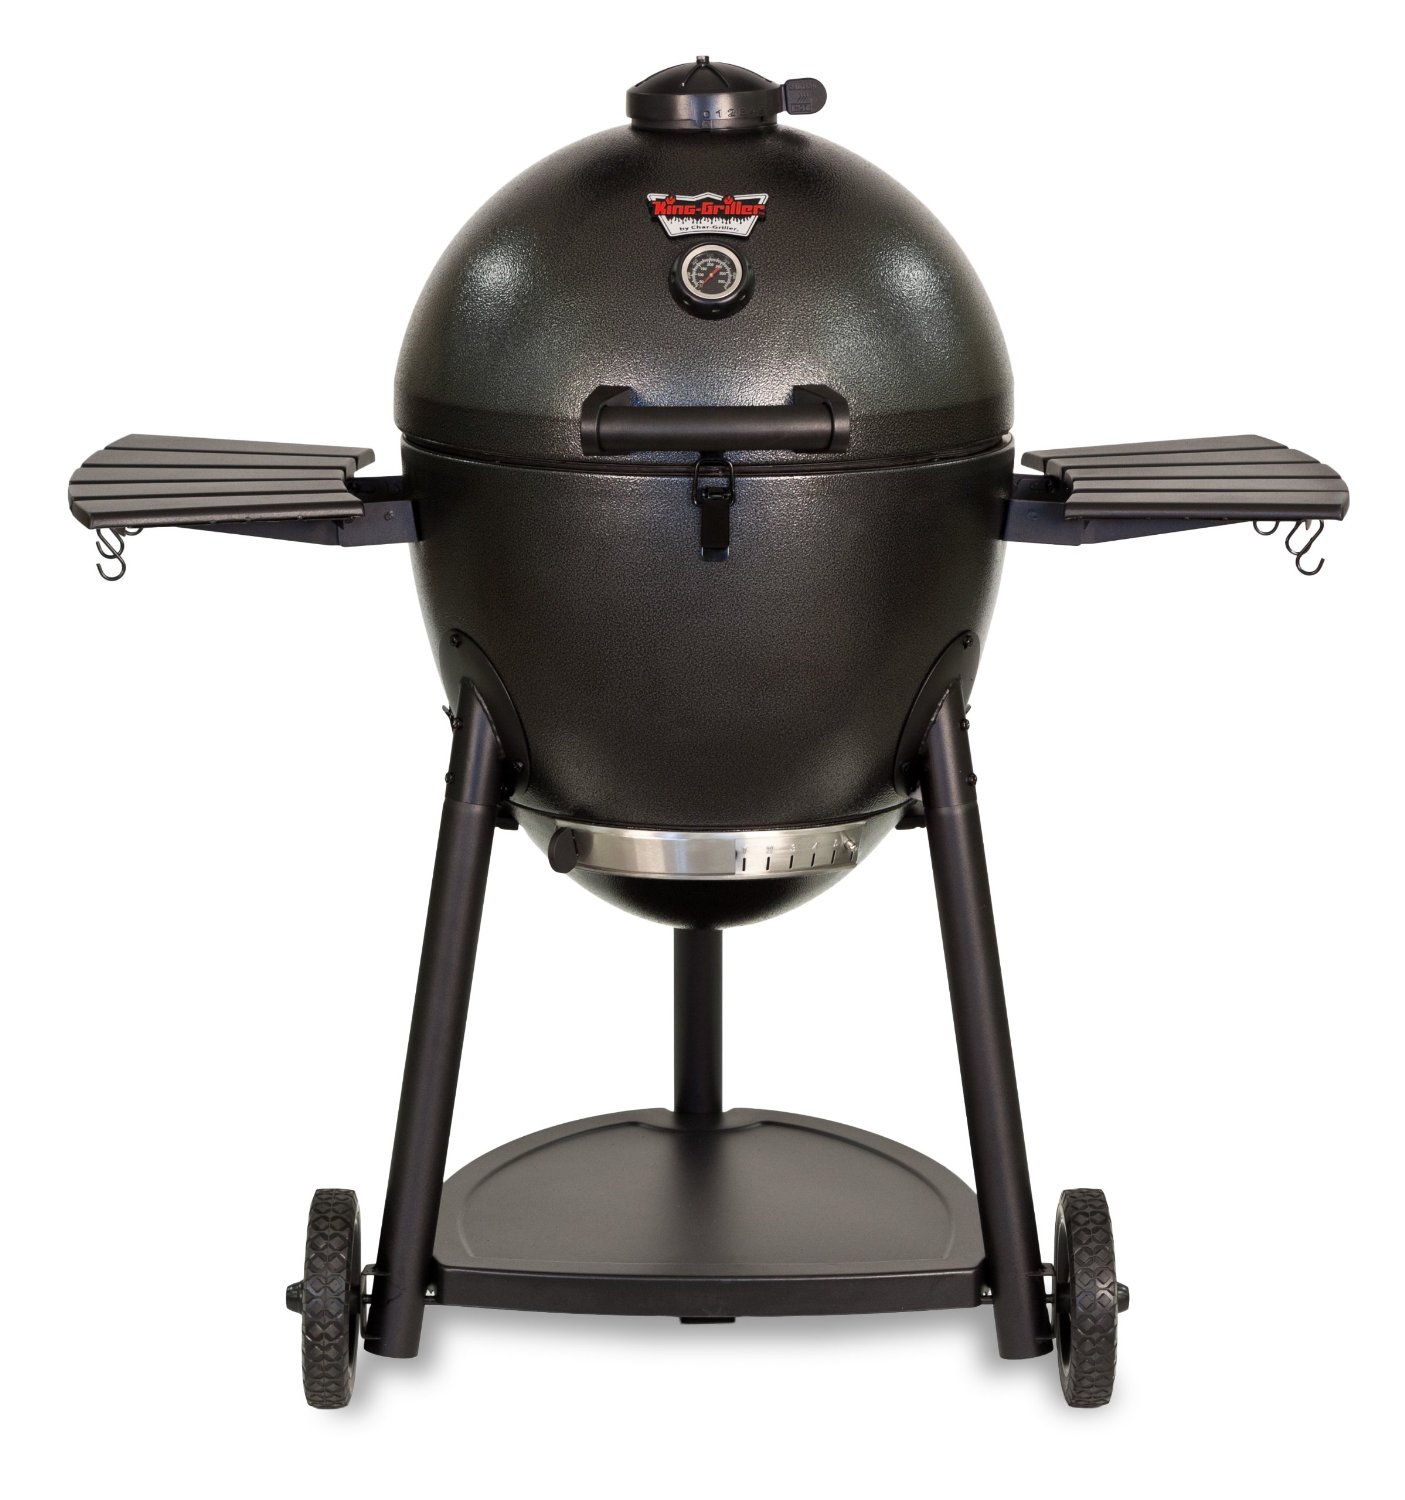 Grill Buying Guide When and Where to Look for the Best BBQ Deals